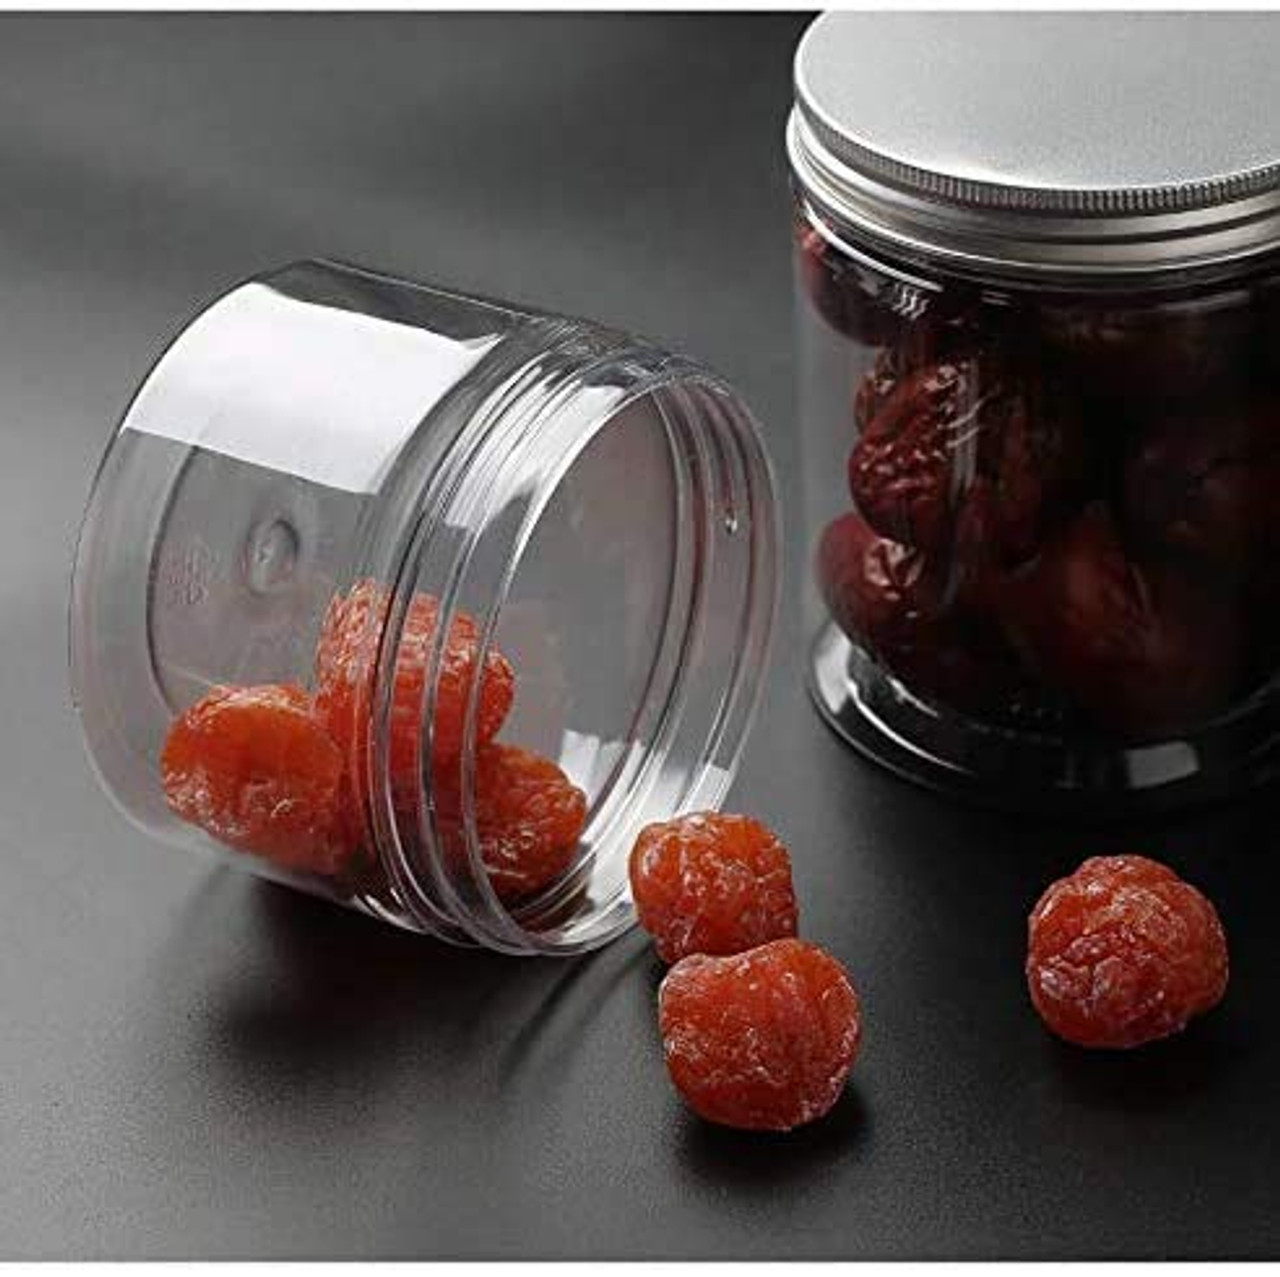  Ball Jar Plastic Pint Freezer Jars with Snap-On Lids, 16-Ounces  (2-Count): Food Savers: Home & Kitchen